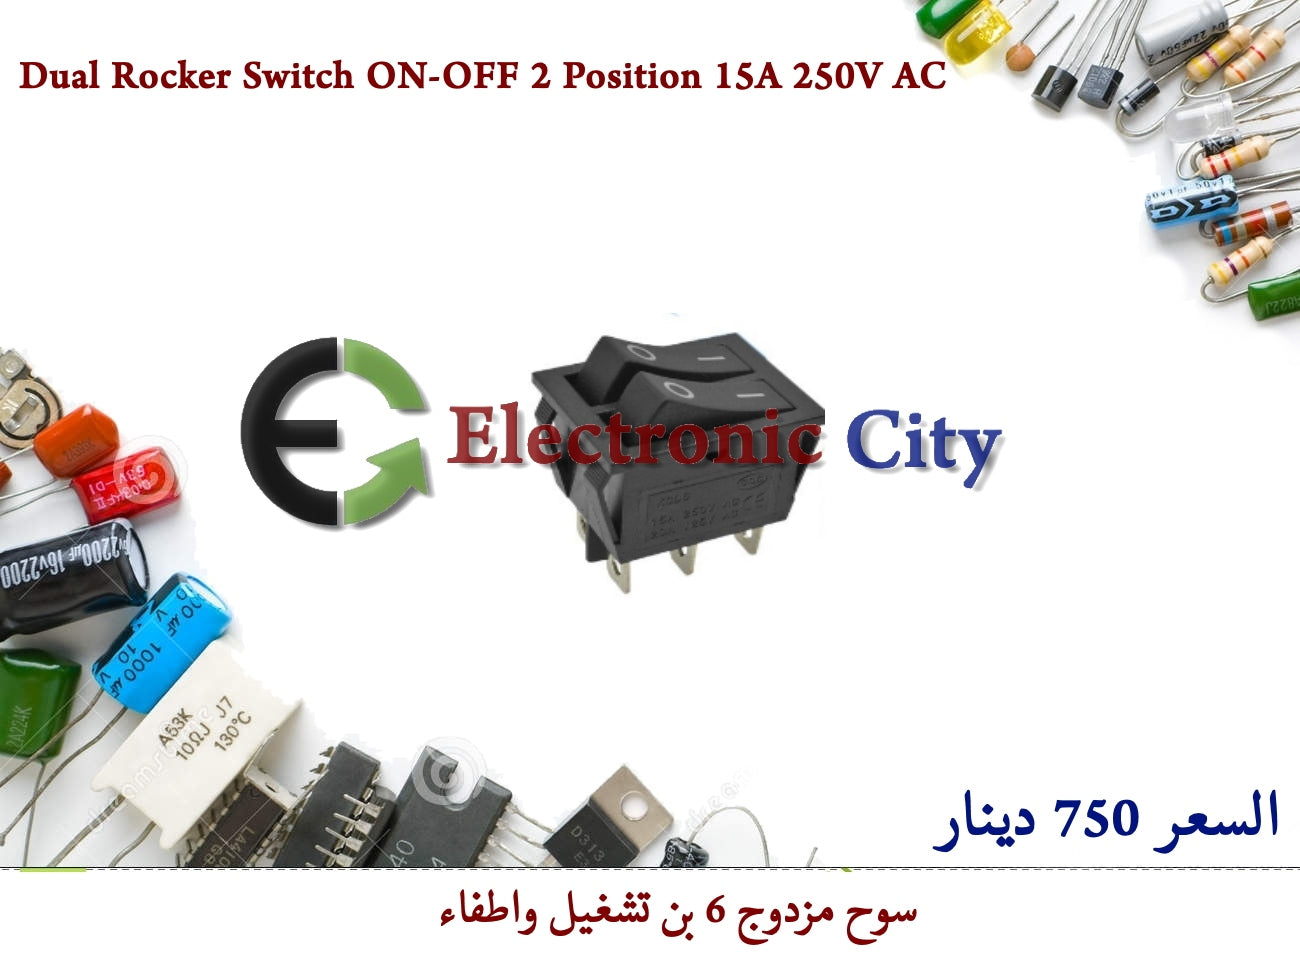 Dual Rocker Switch ON-OFF 2 Position 15A 250V AC